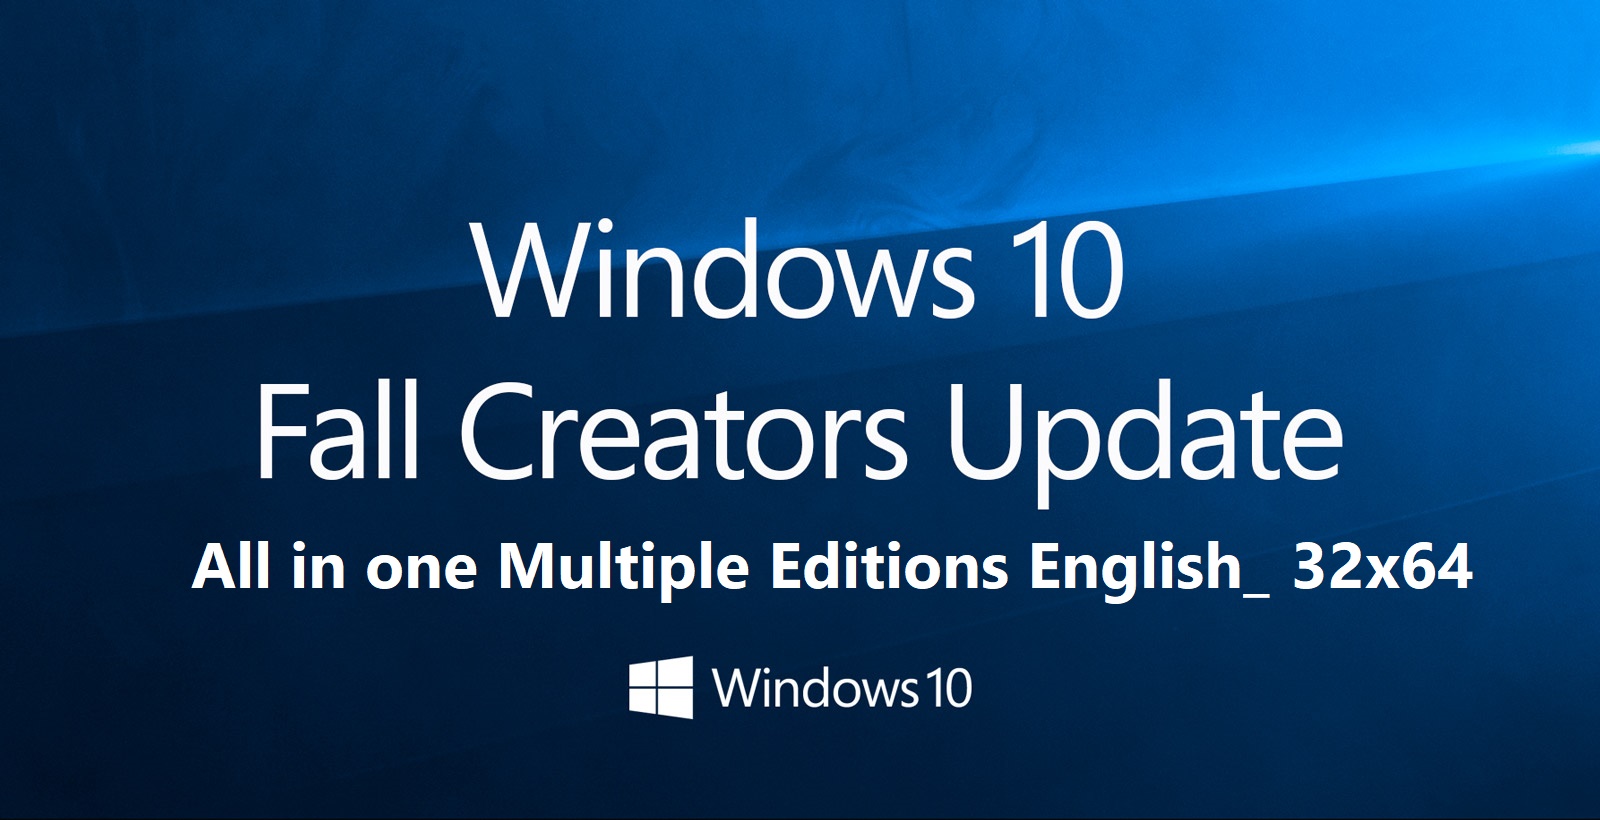 windows-10-fall-creators-all-in-one-multiple-editions-english.jpg